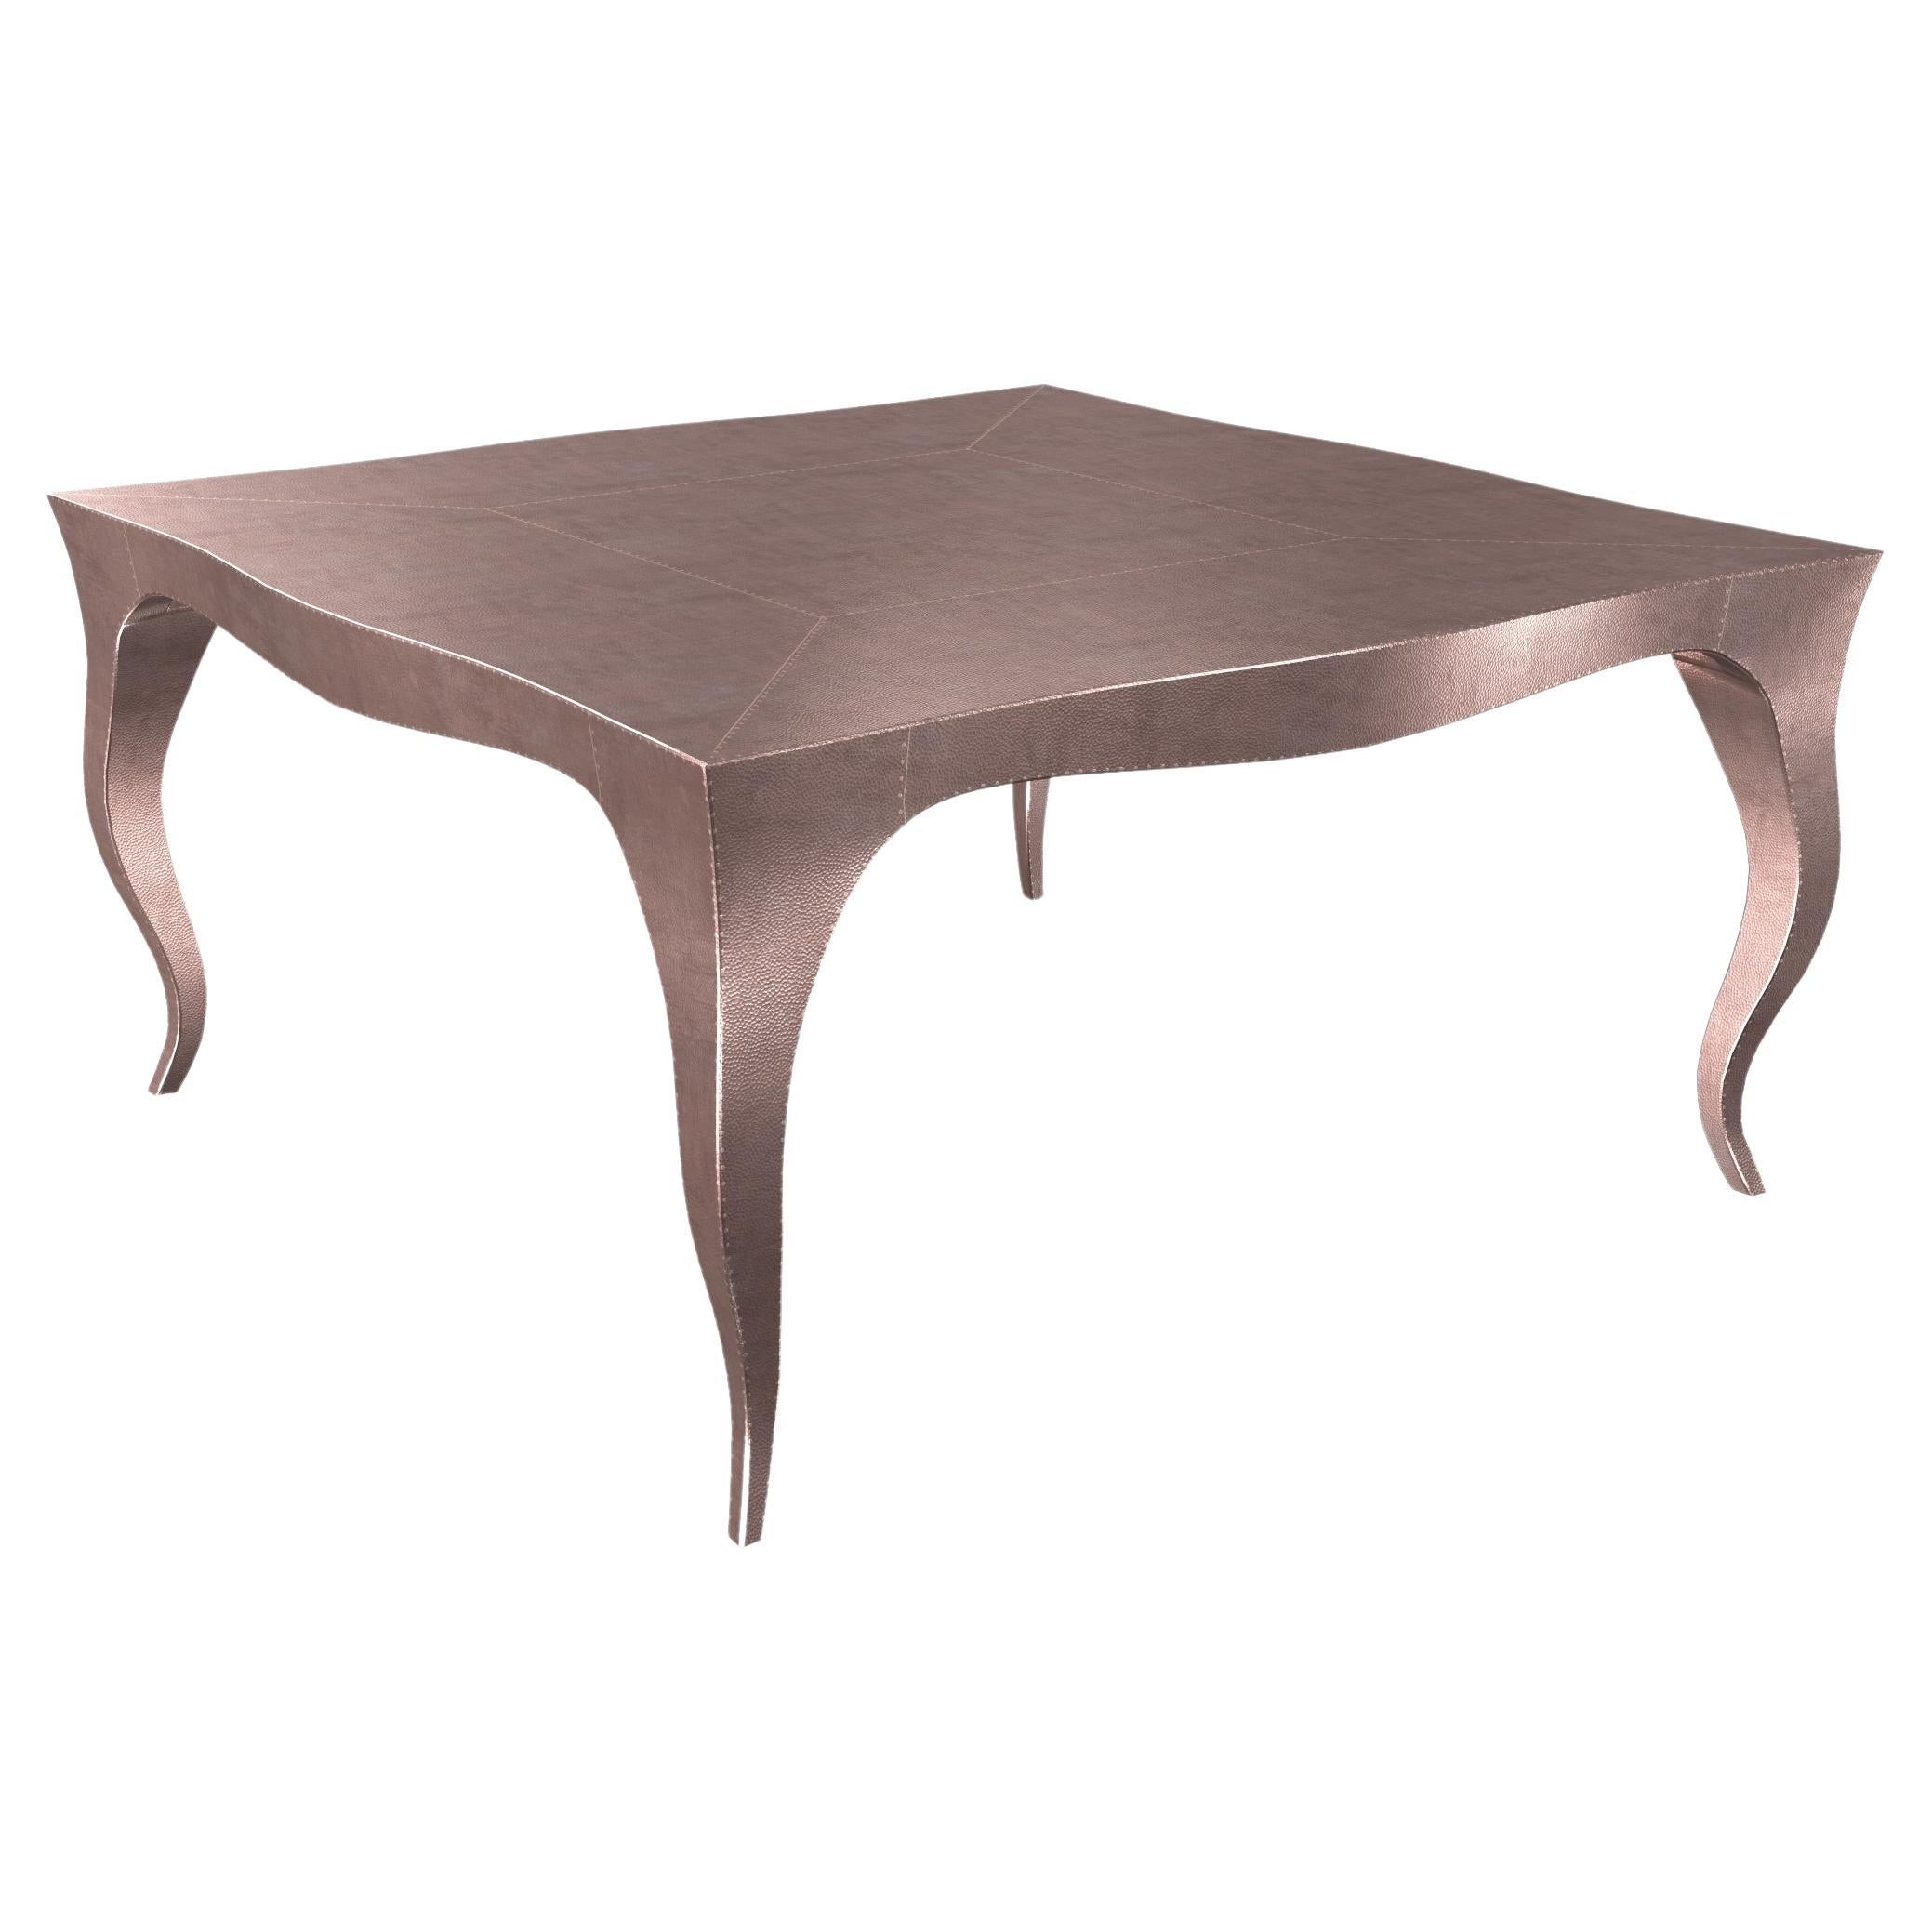 Louise Art Deco Center Tables Mid. Hammered Copper 18.5x18.5x10 inch  For Sale